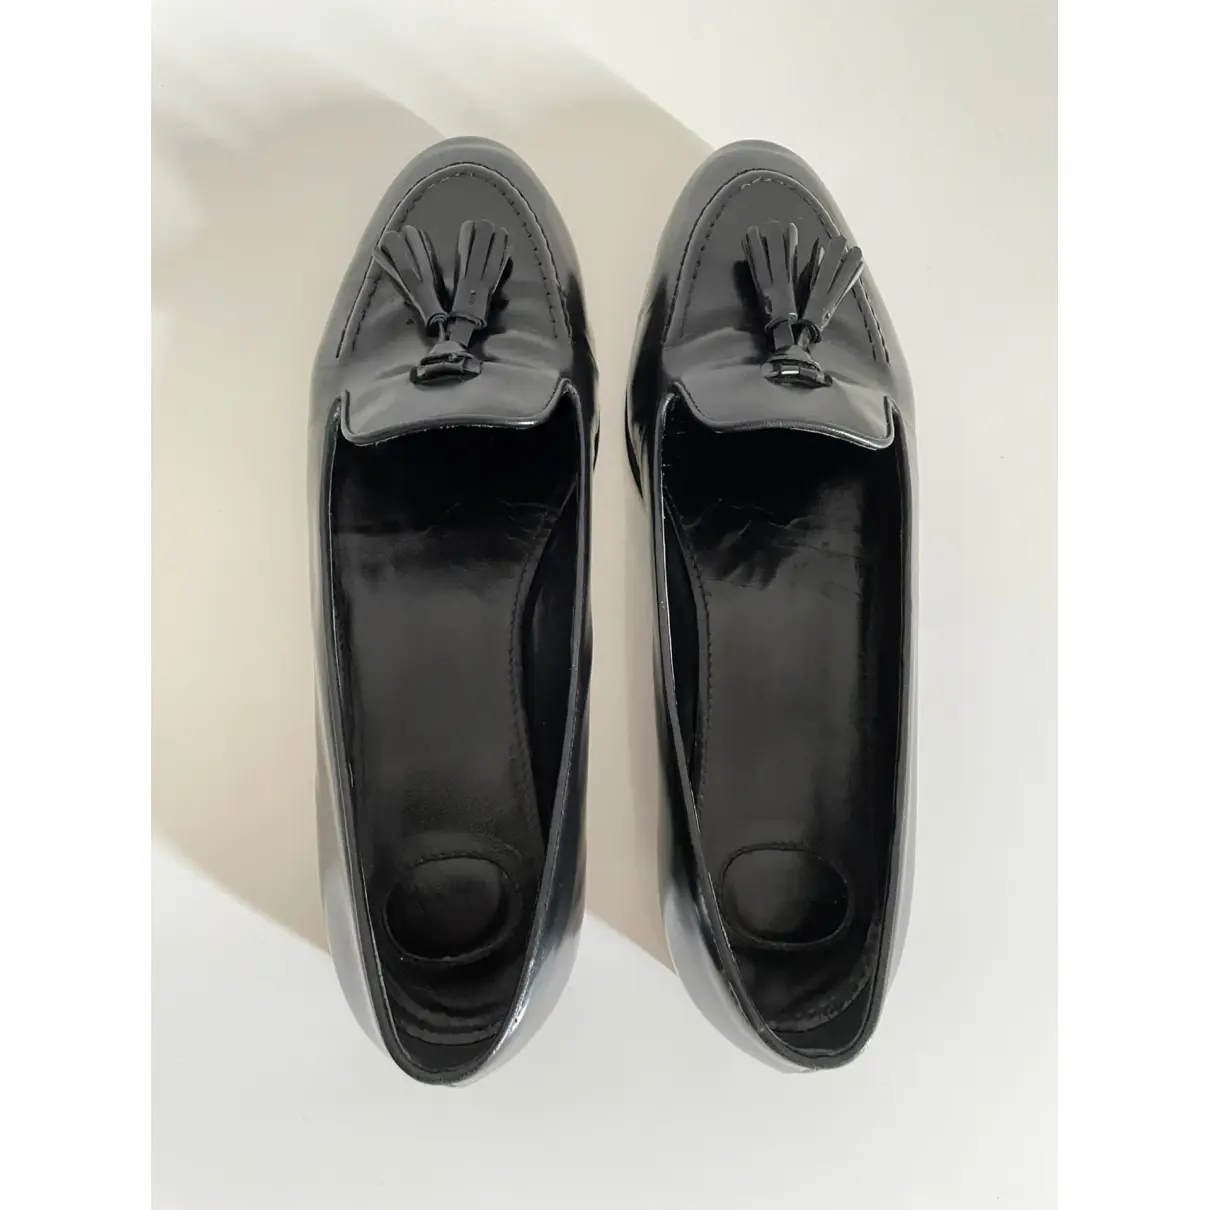 Buy Church's Leather flats online